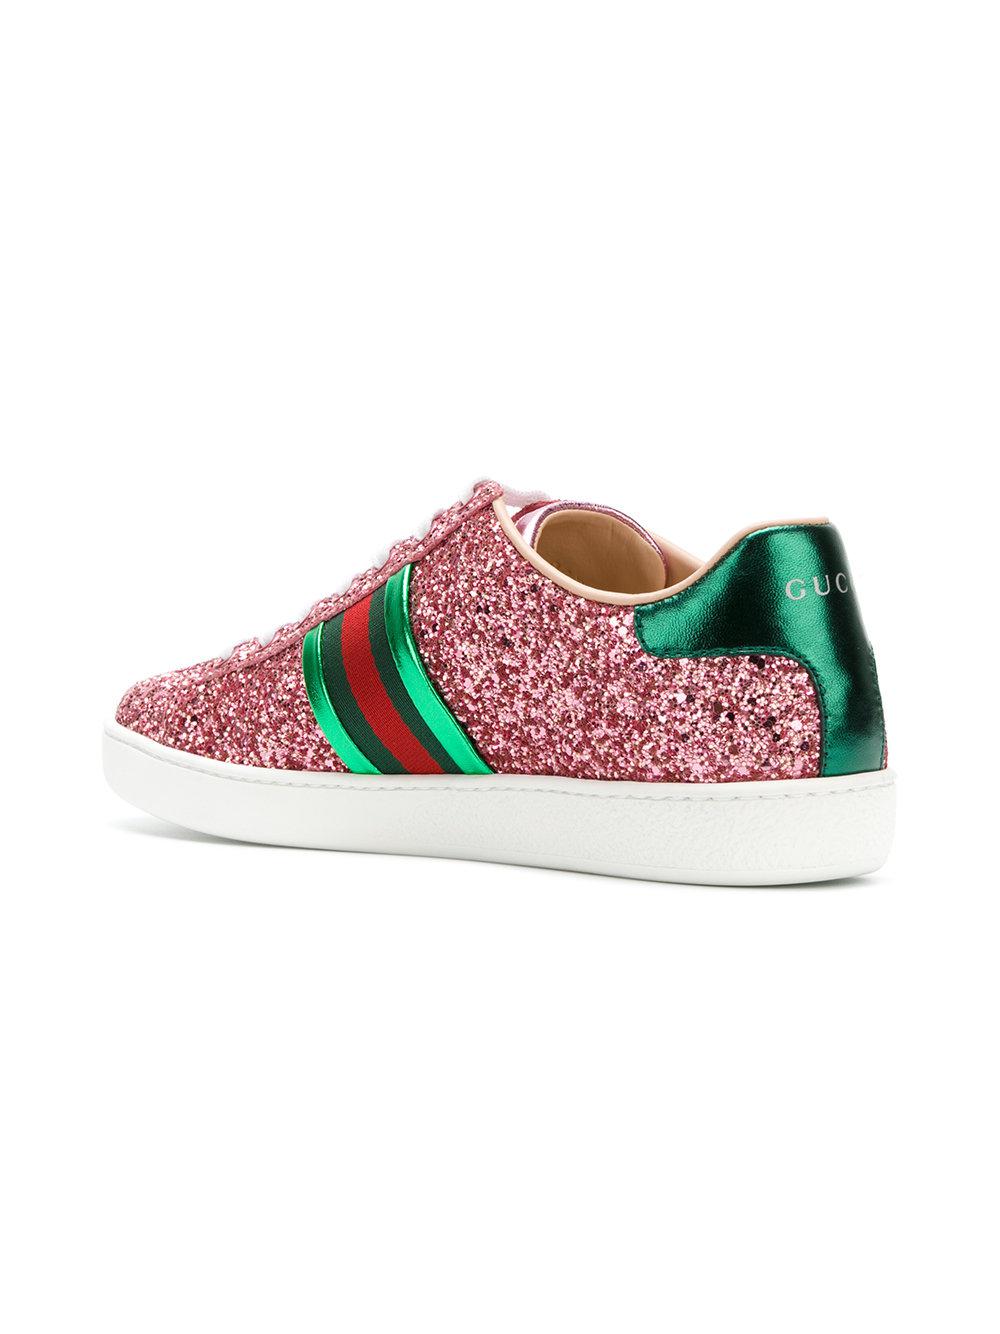 Gucci Ace Glitter Sneakers in Pink | Lyst